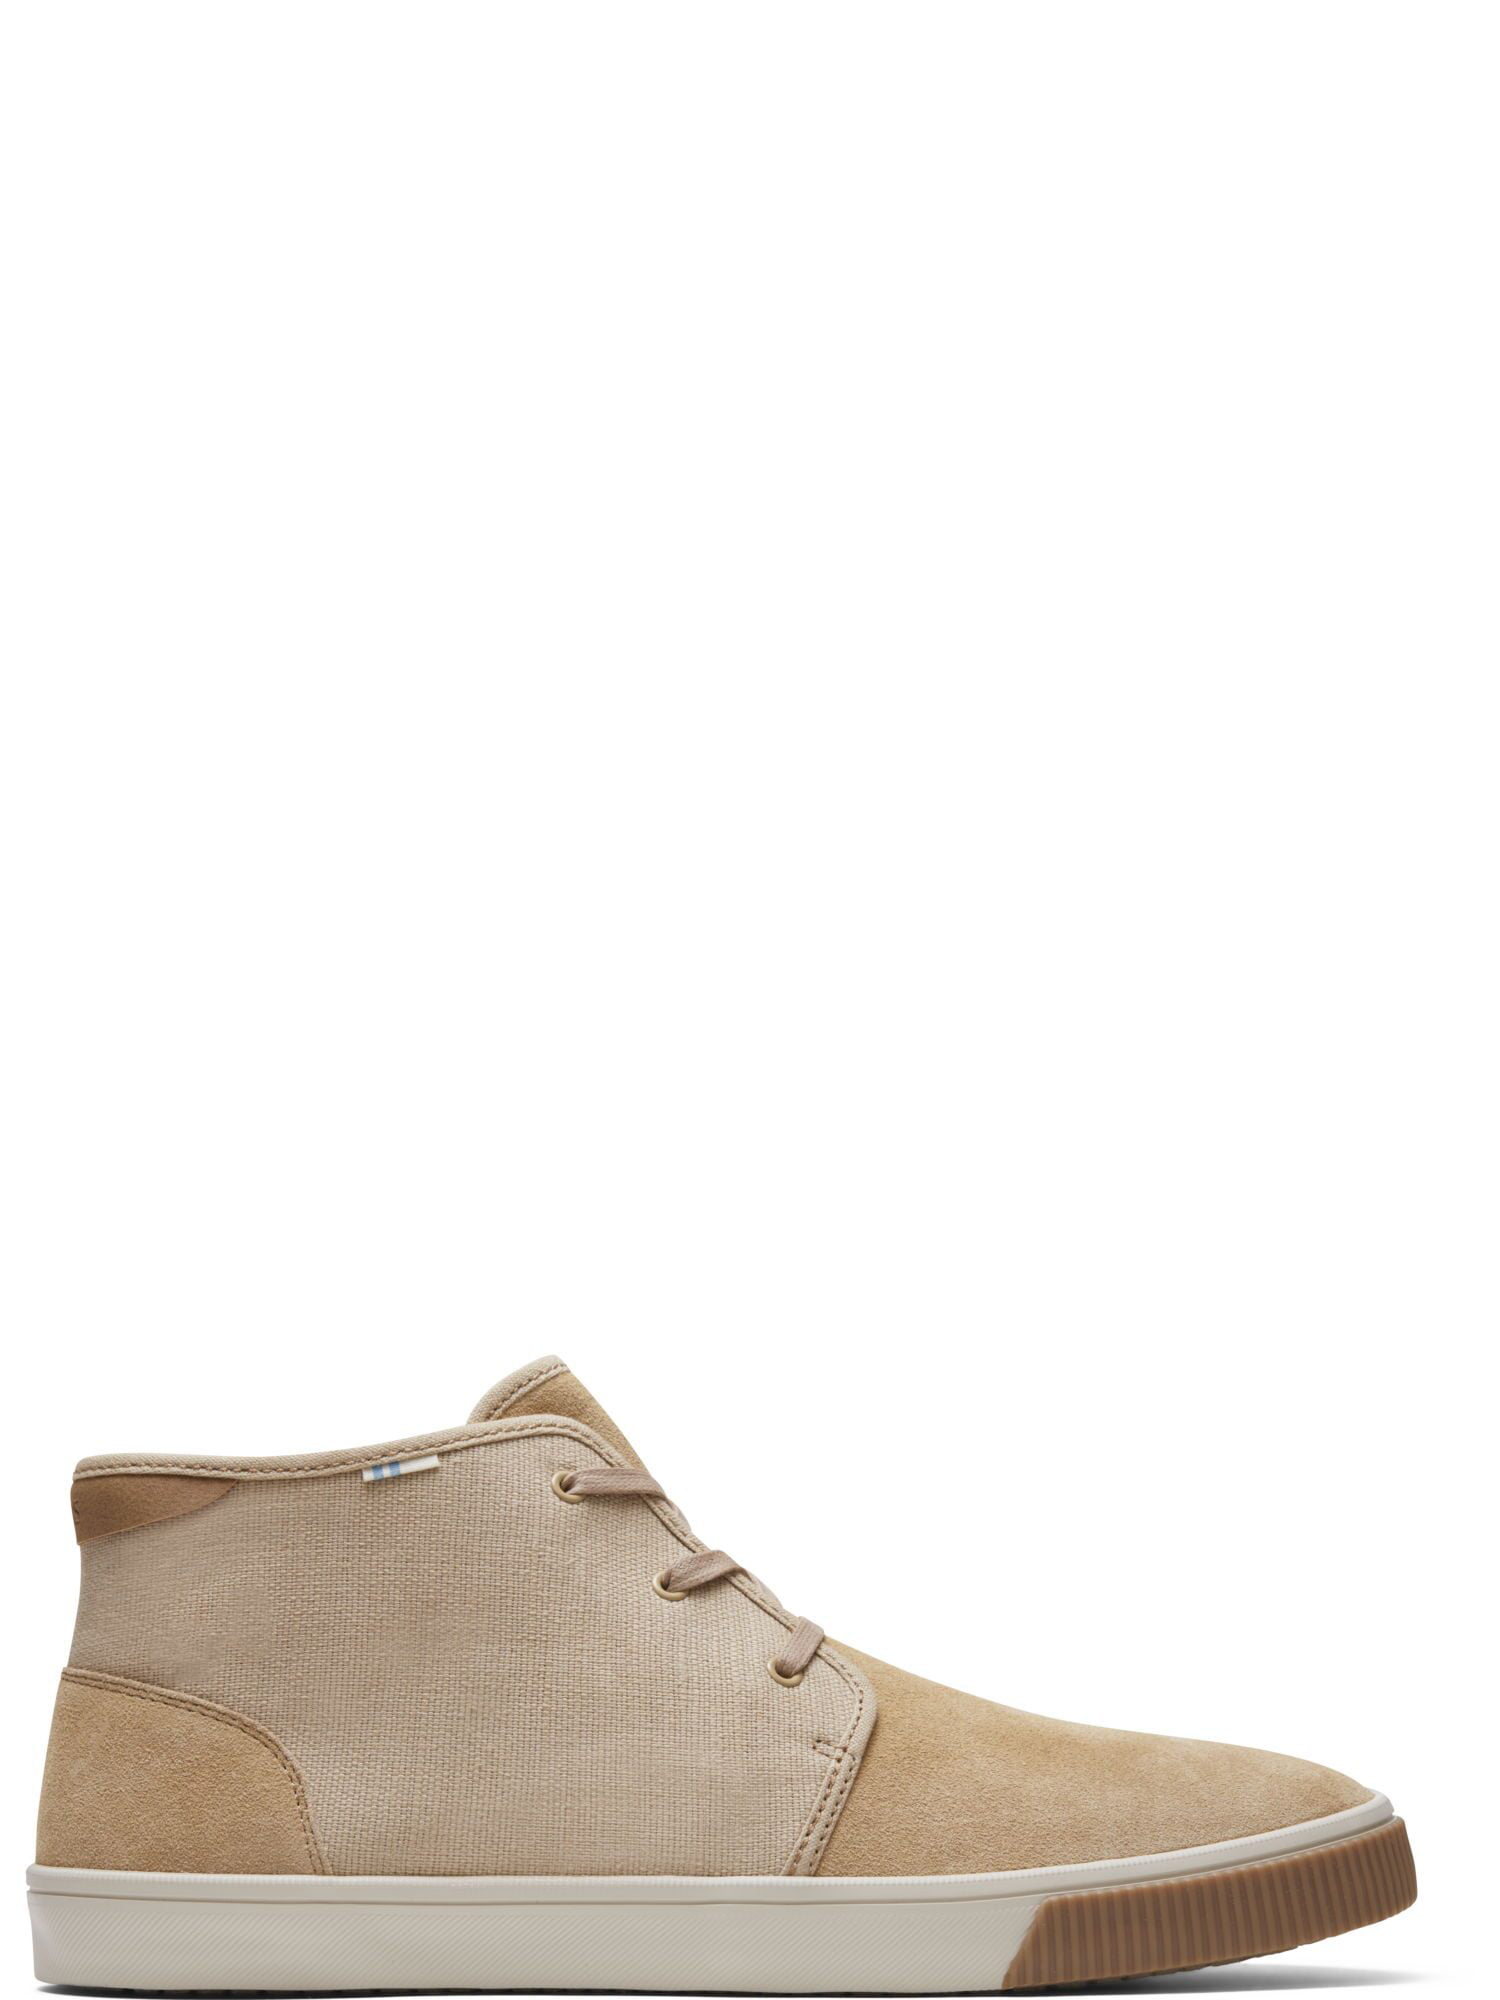 TOMS Men's Tan Suede and Heritage Canvas Carlo Mid Sneakers 